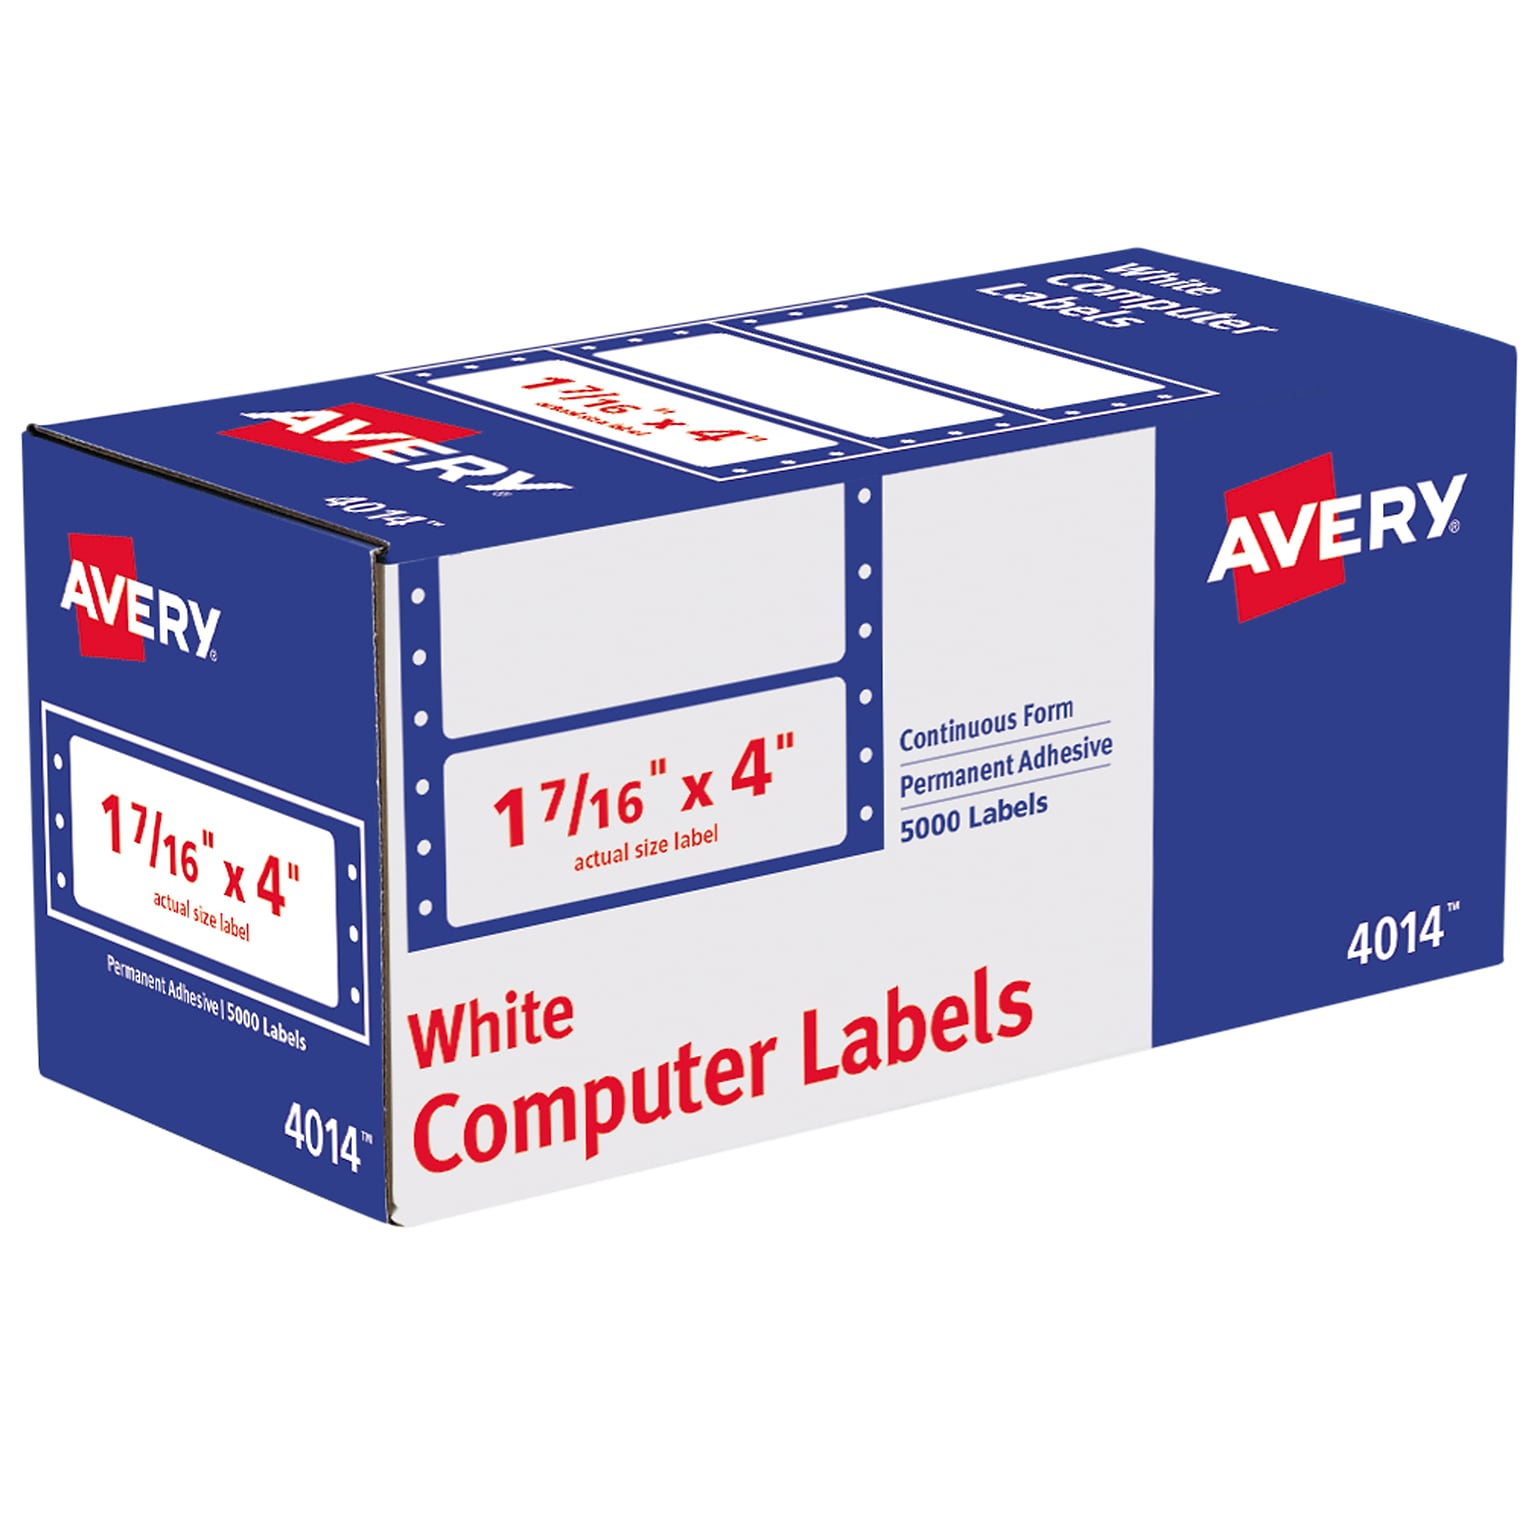 Avery Pin Fed Continuous Form Computer Labels, 4 x 1-7/16, White, 1 Label Across, 4 3/4 Carrier, 5,000 Labels/Box (4014)